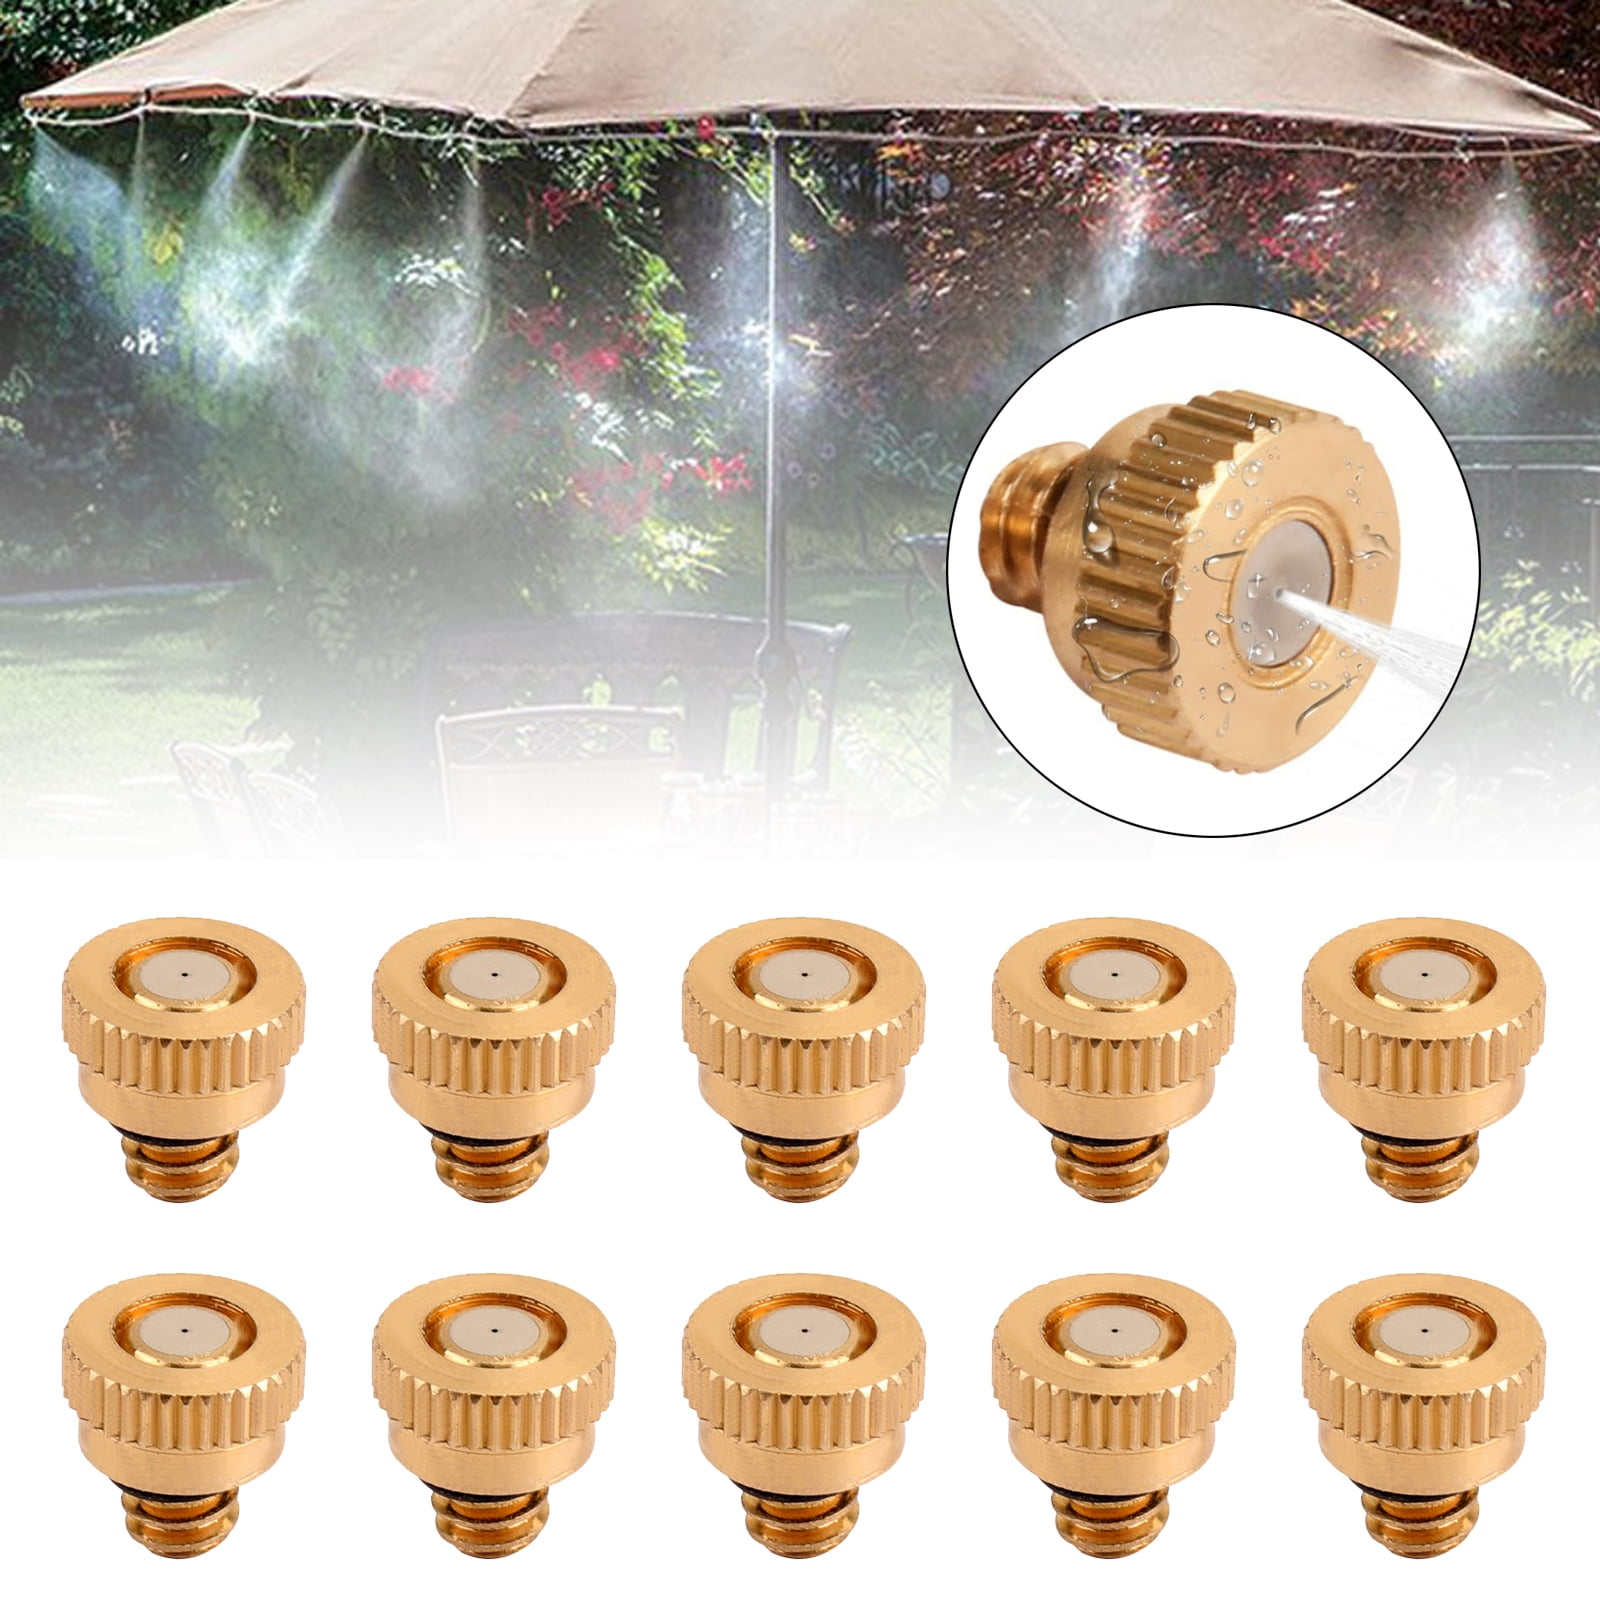 Landscaping 0.4mm Orifice Outdoor Cooling Mister System 20 Pack Brass Misting Nozzles Replacement Heads 10/24 UNC Dust Control 0.016 Low Pressure Atomizing Misting Sprayer for Patio Lawn